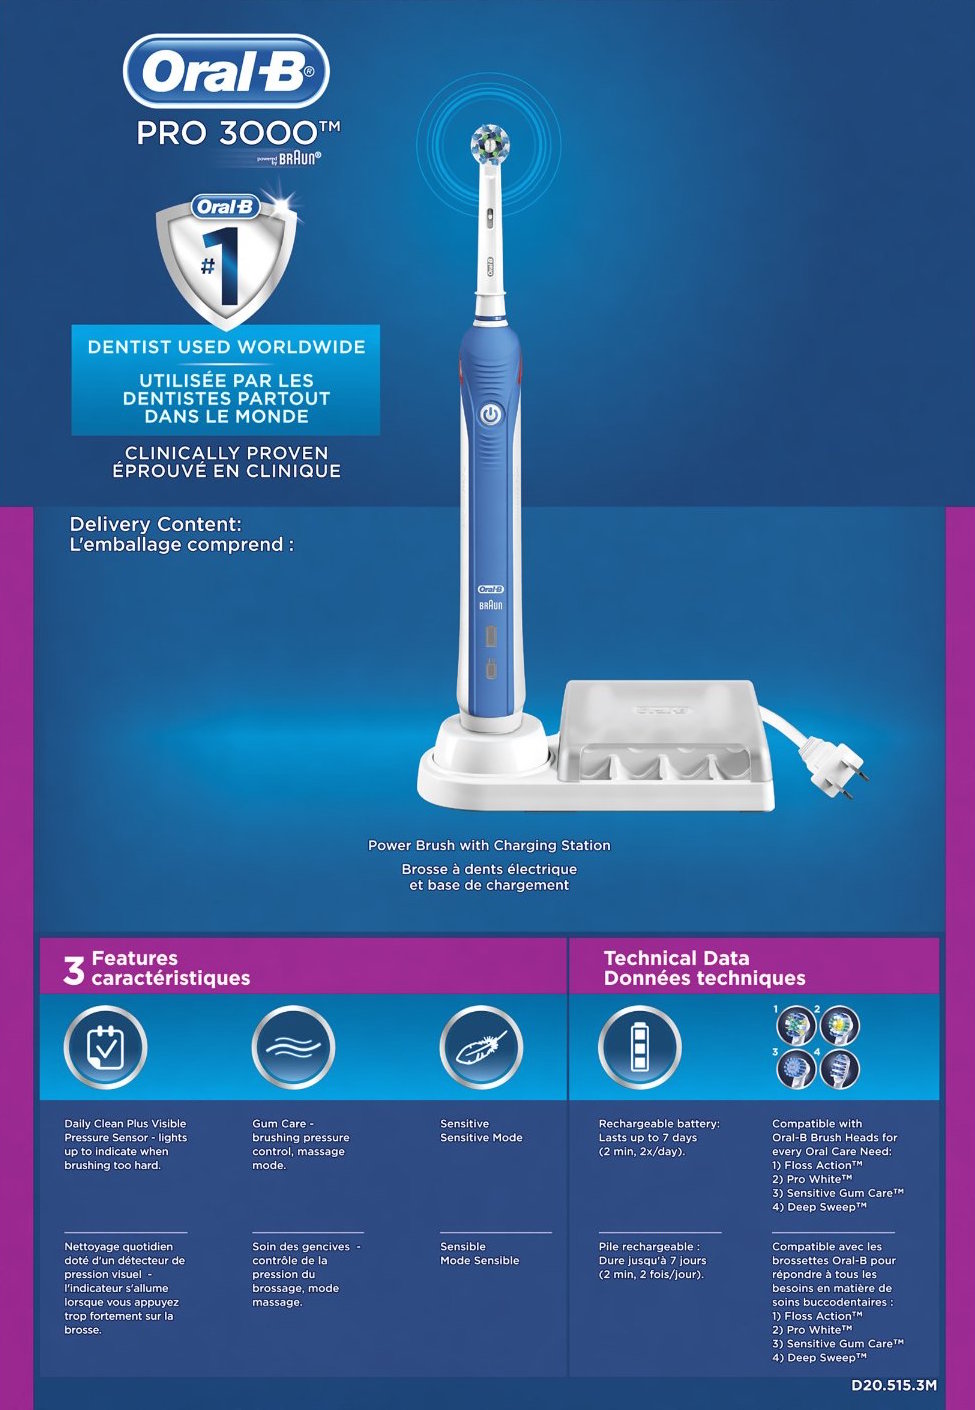 https://9to5toys.com/wp-content/uploads/sites/5/2015/06/oral-b-pro-3000-electric-rechargeable-power-toothbrush-sale-02.jpg